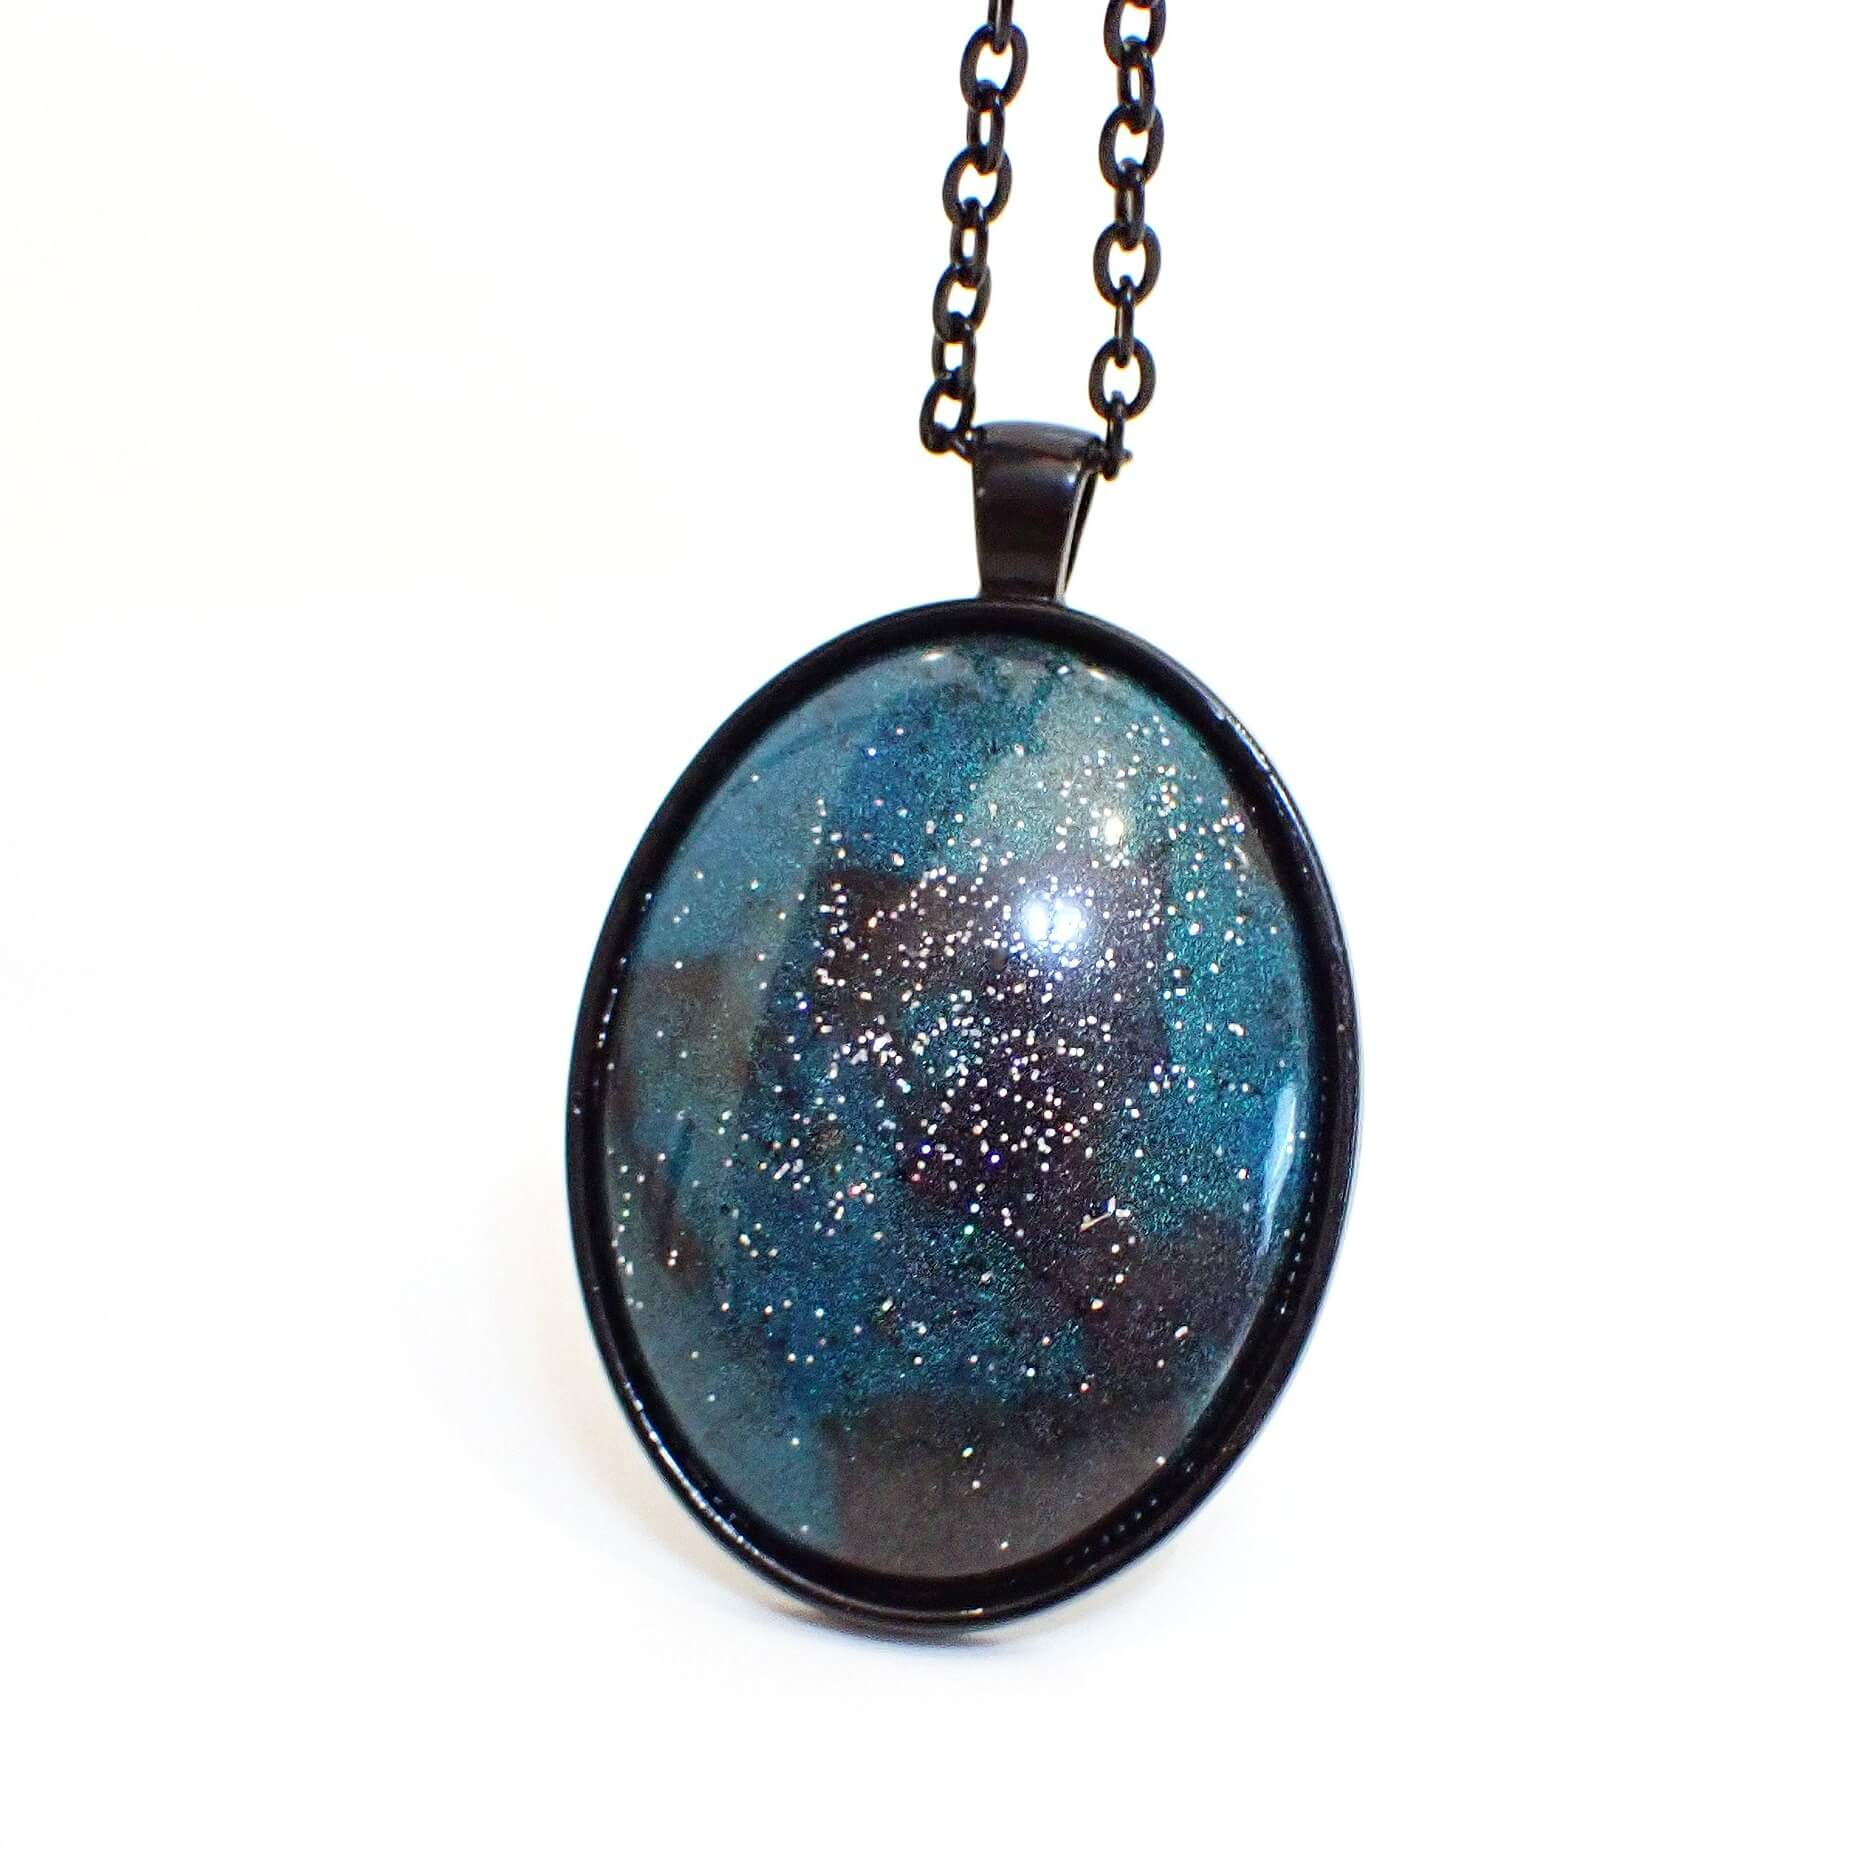 Enlarged front view of the handmade Goth pendant necklace. The metal is black coated in color on the chain and on the pendant setting. The pendant is a large domed oval with pearly dark gray and teal blue resin. There is silver holographic glitter embedded in the resin for tiny specks of sparkle and flashes of color as you move around in the light.